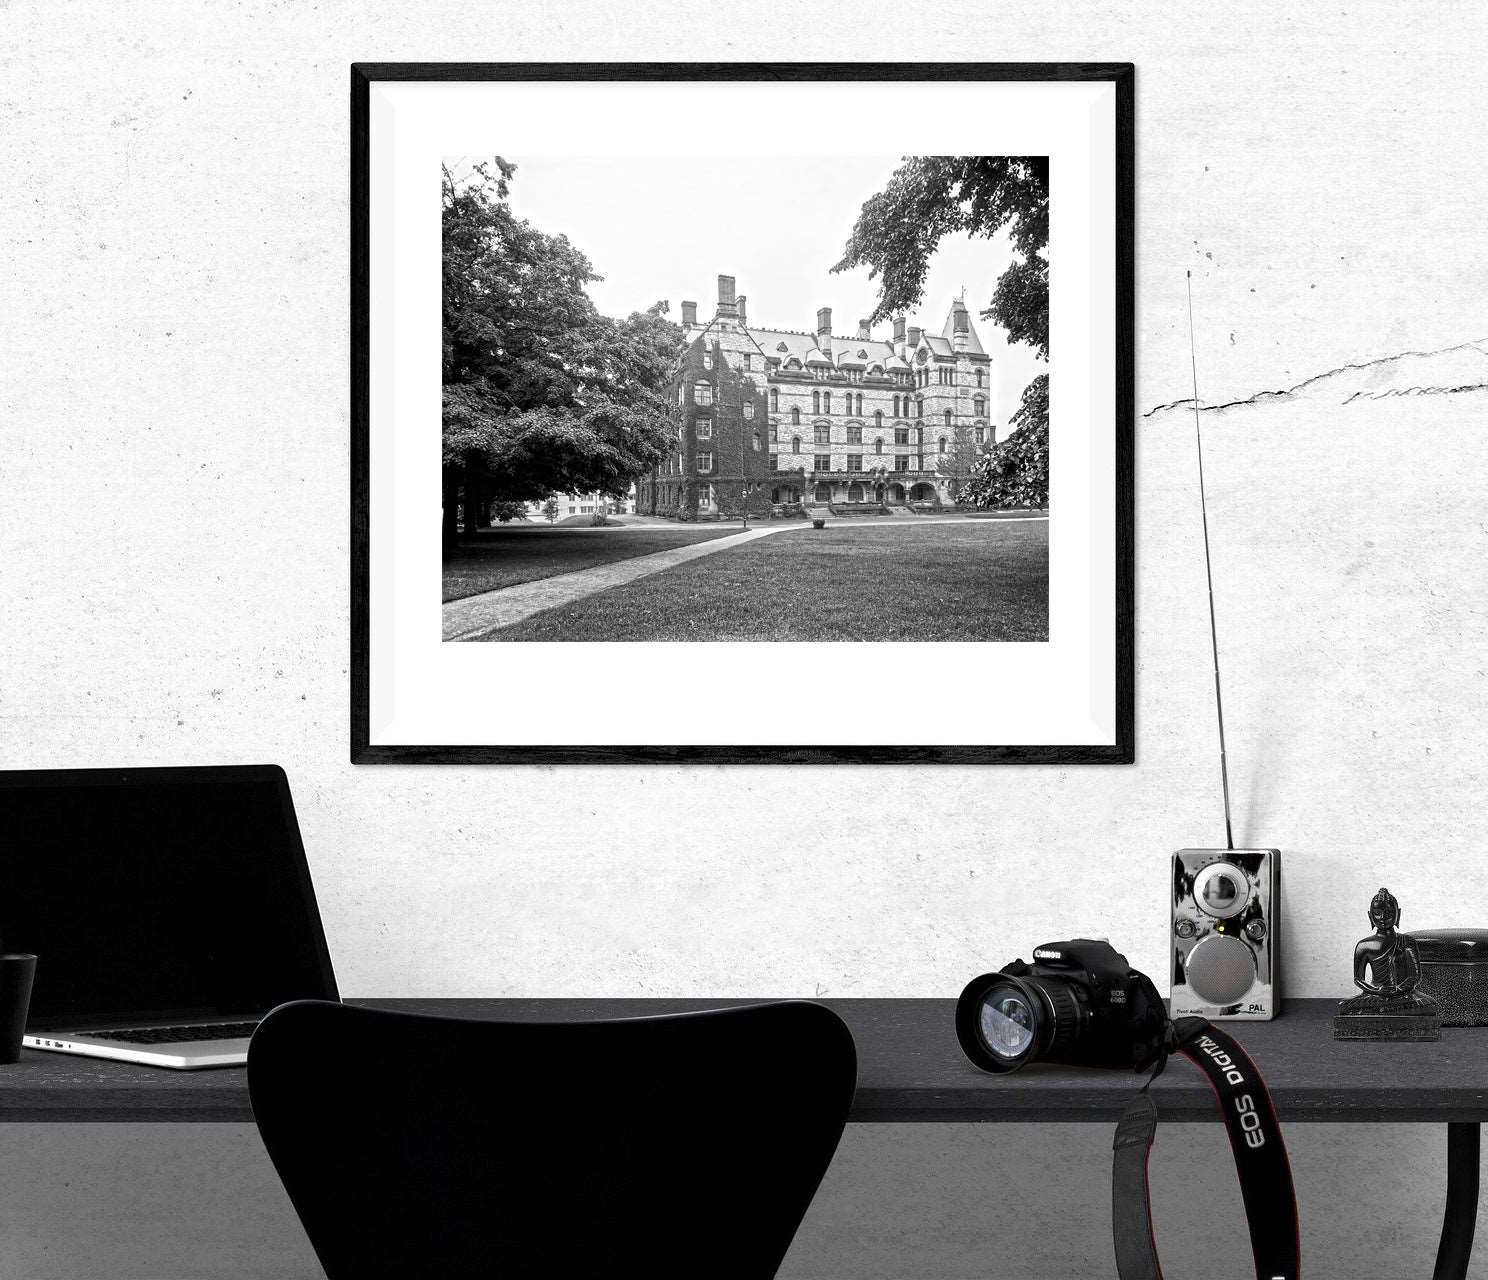 A desk with a laptop and camera, with a framed paper print hanging above featuring a vintage photo of Witherspoon Hall